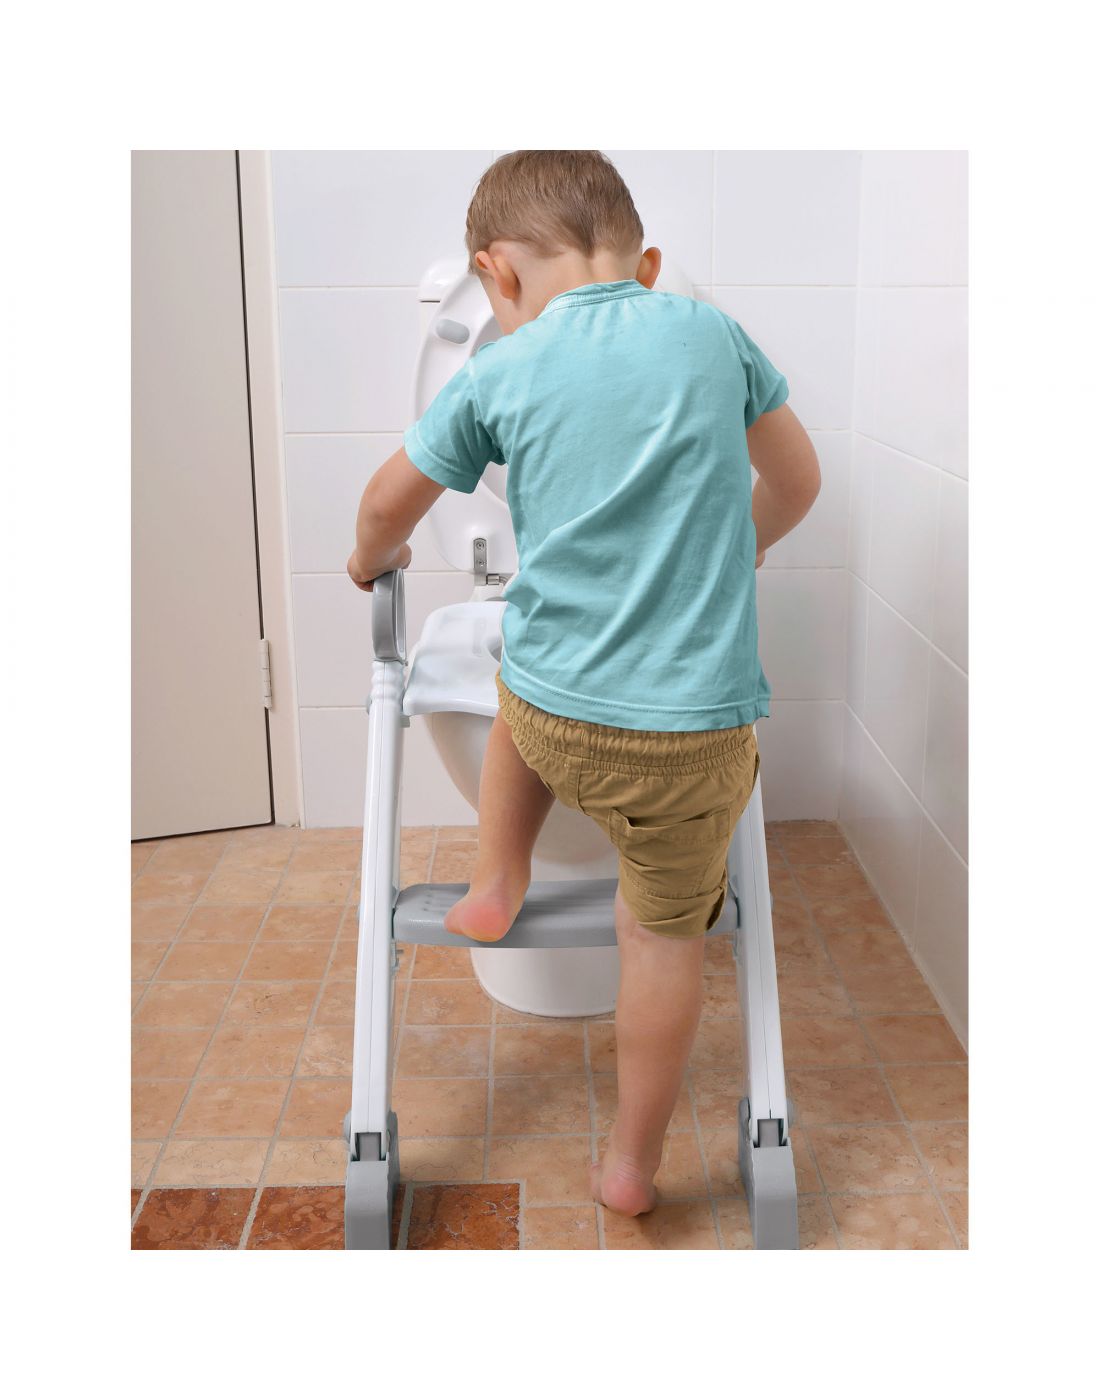 DreamBaby Kids Toilet Trainer Seat with step Grey/White